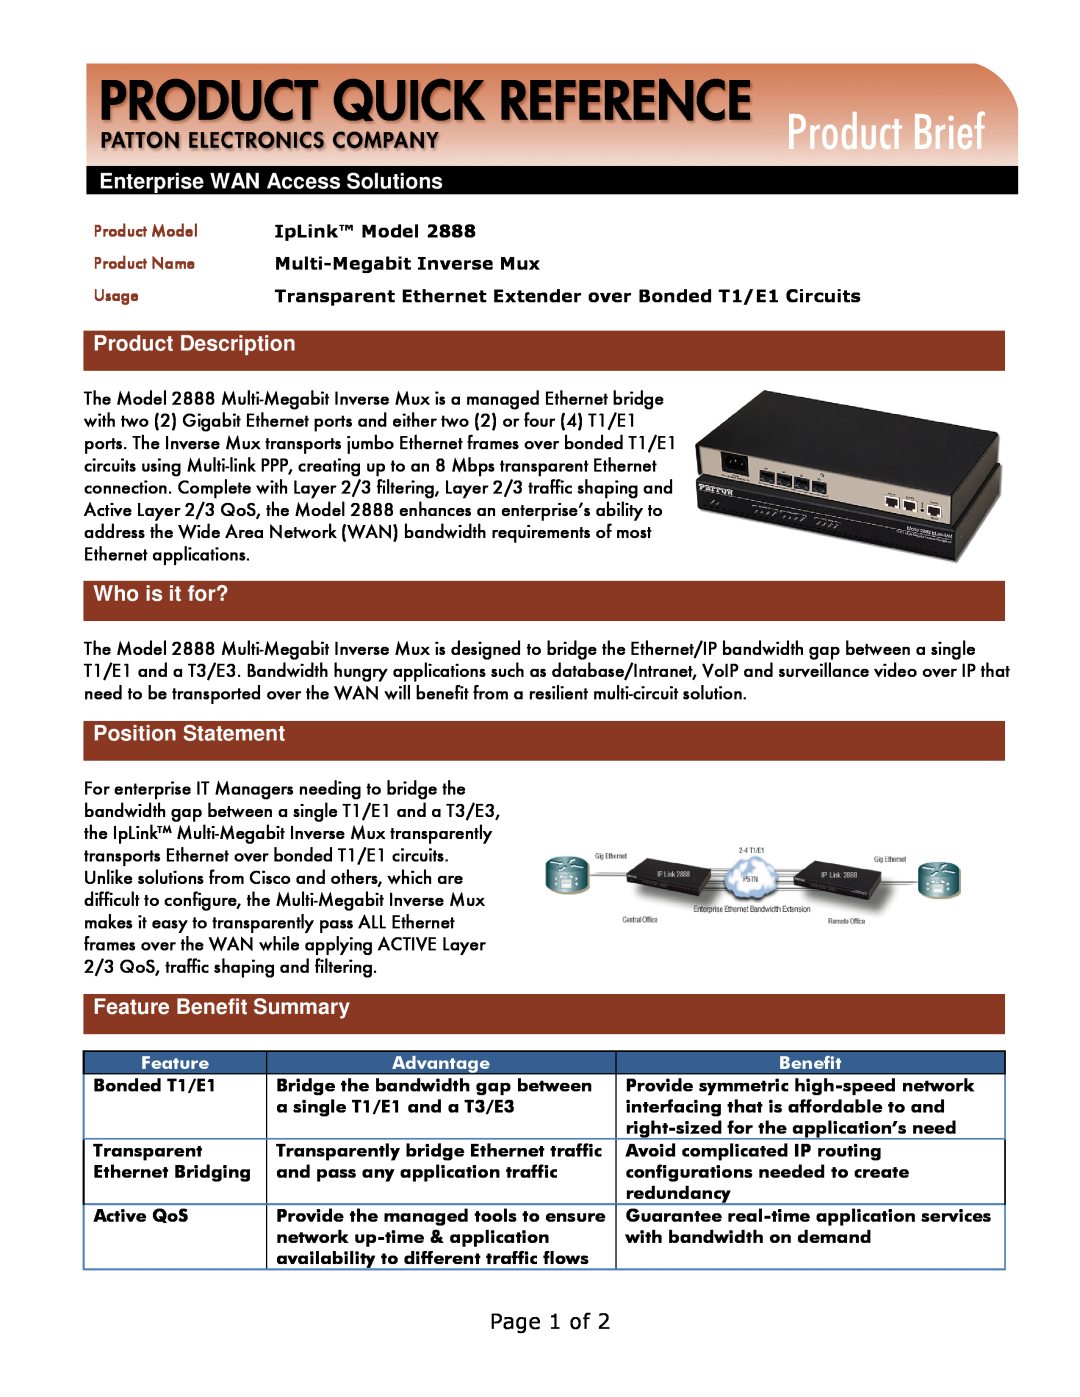 Patton electronic 2888 manual Product Brief, Carrier Infrastructure Solutions, Product Description, Who is it for? 